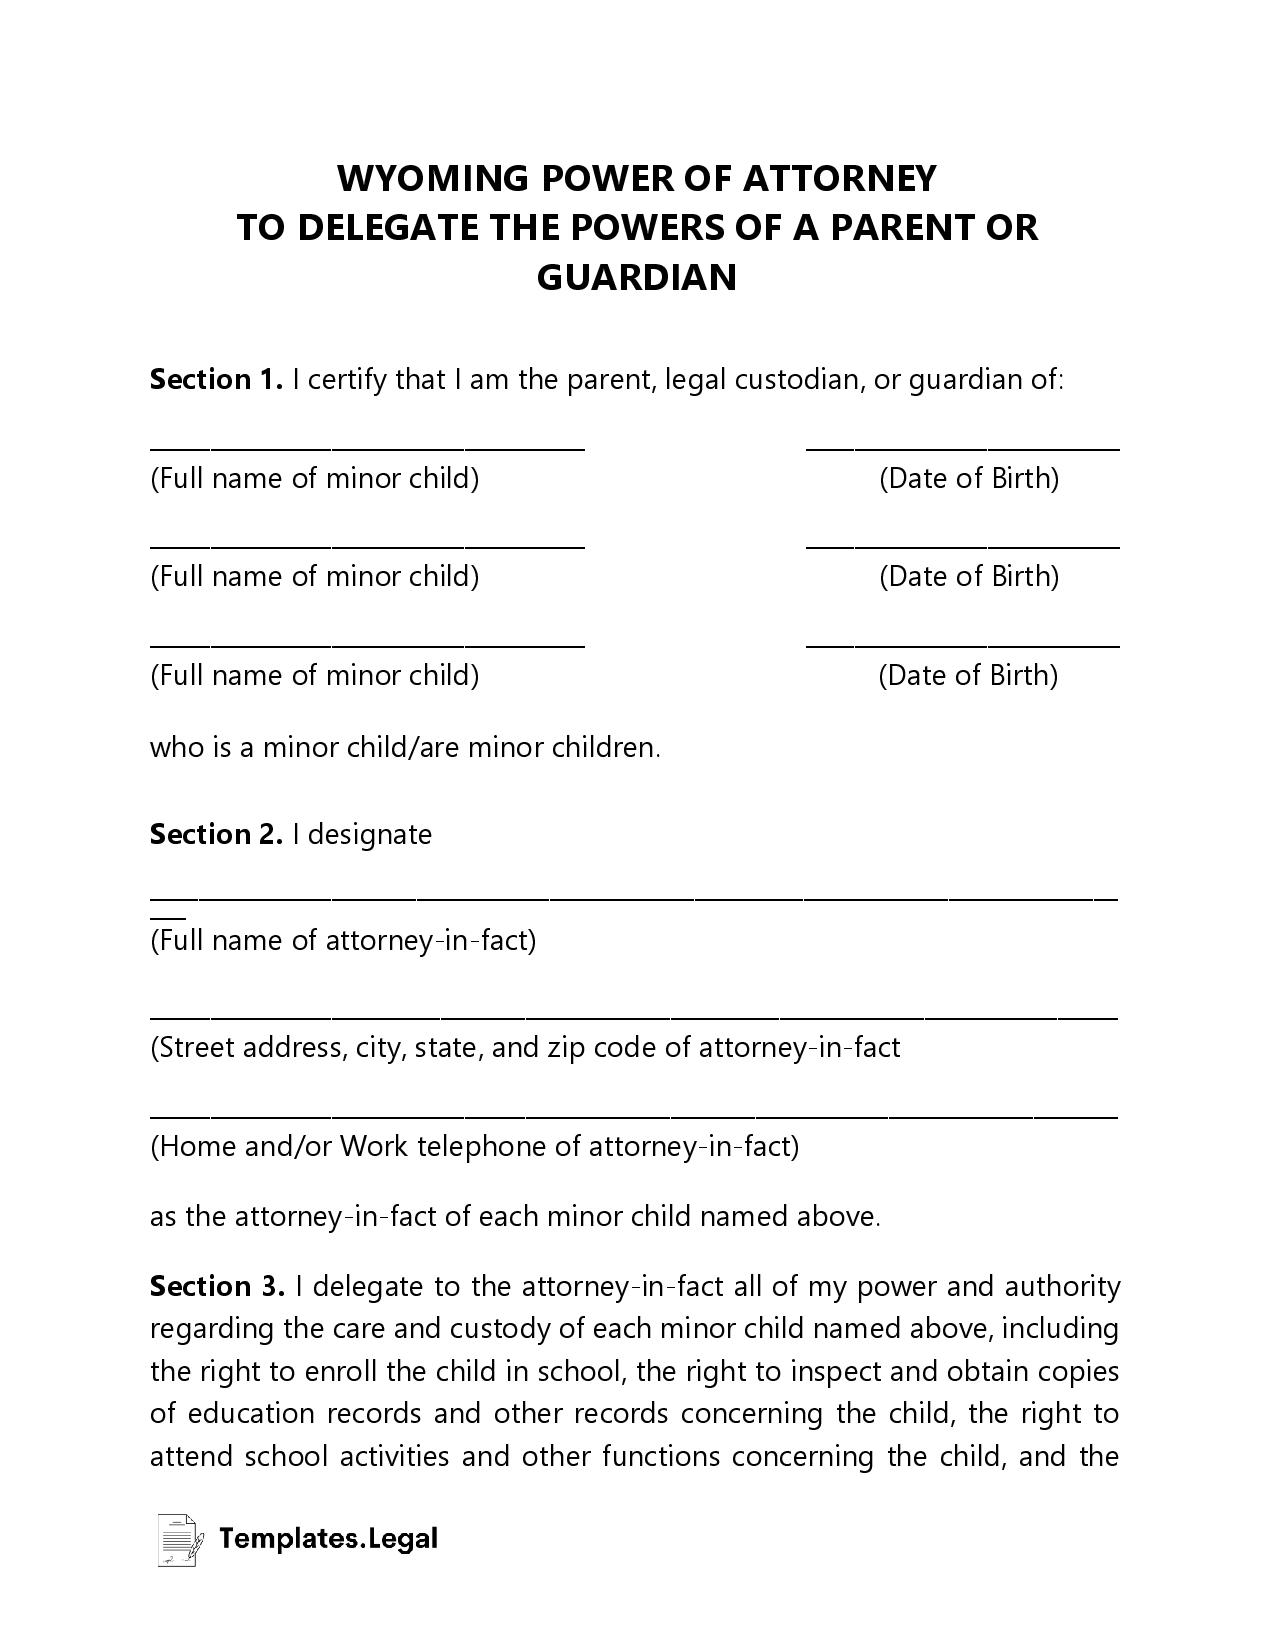 Wyoming Minor (Child) Power of Attorney - Templates.Legal